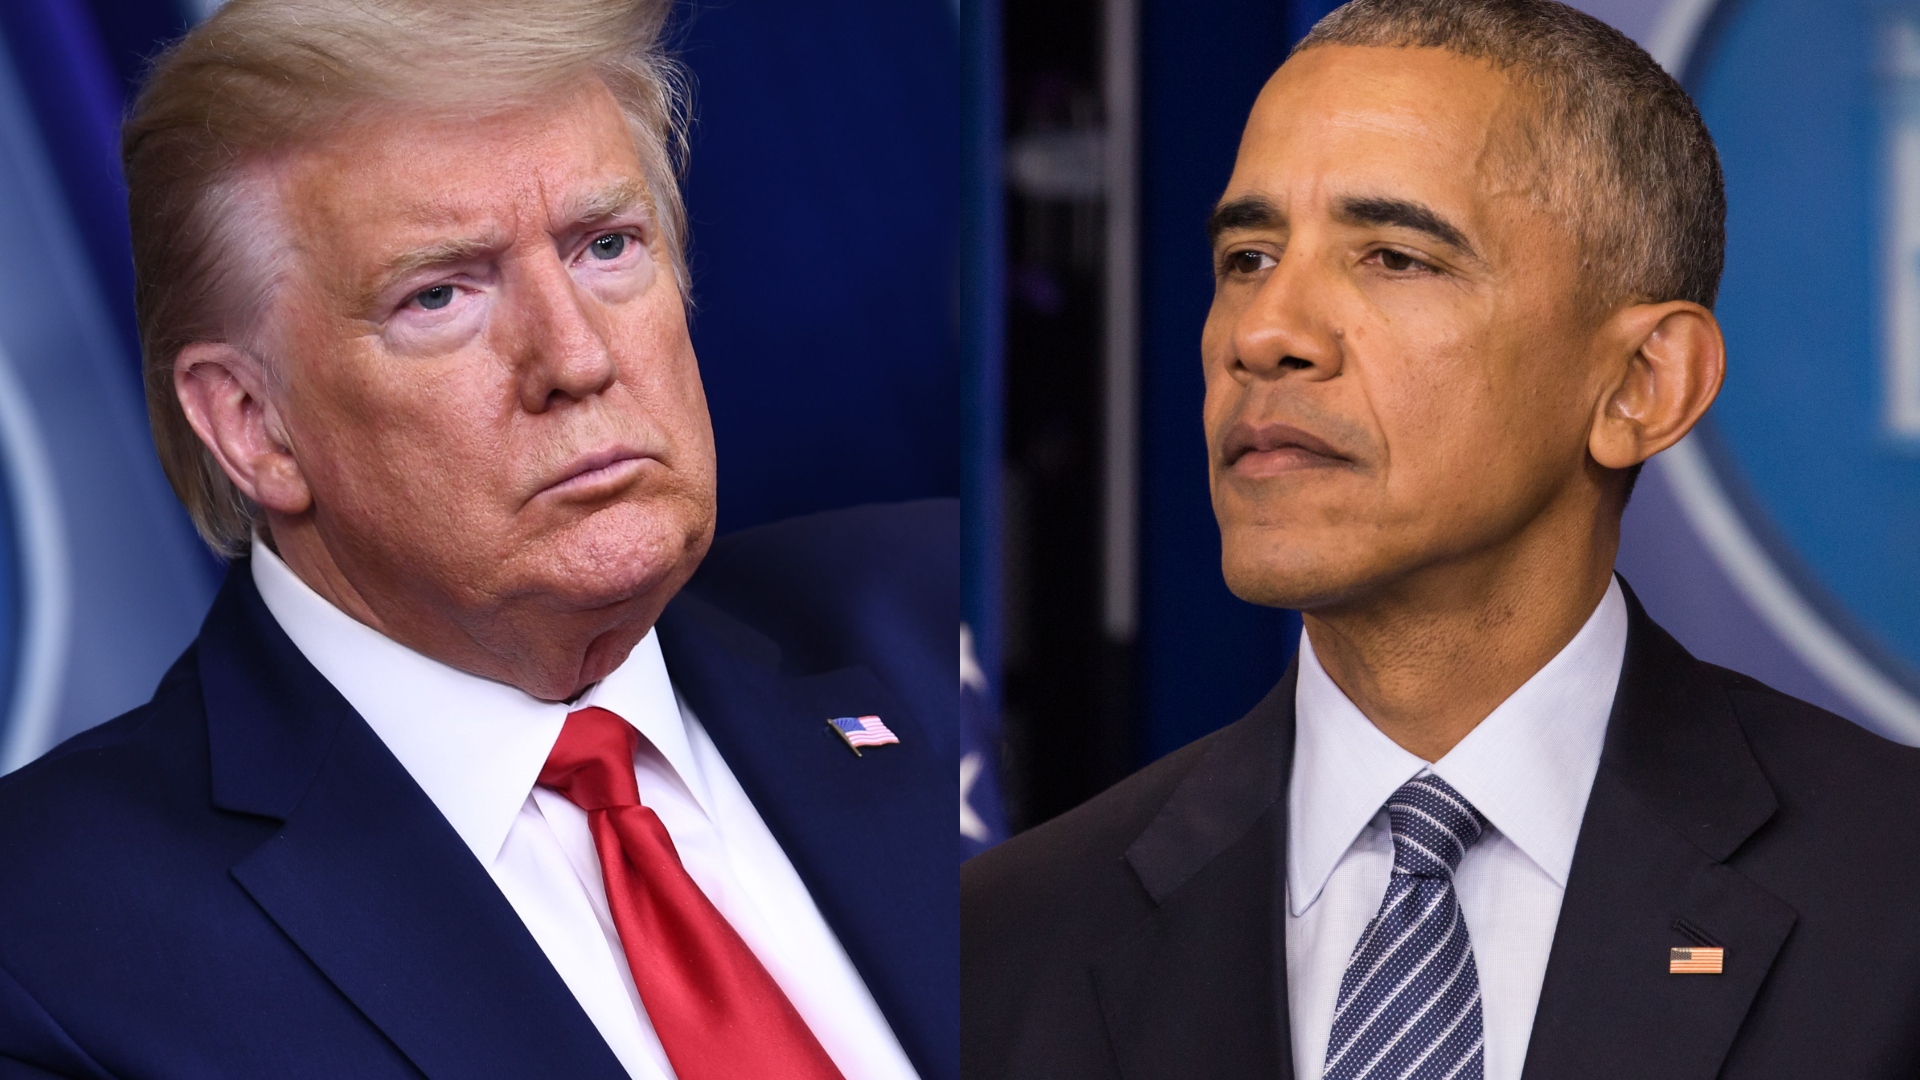 Poll ranks Obama and Trump at opposite ends of the all-time president rankings